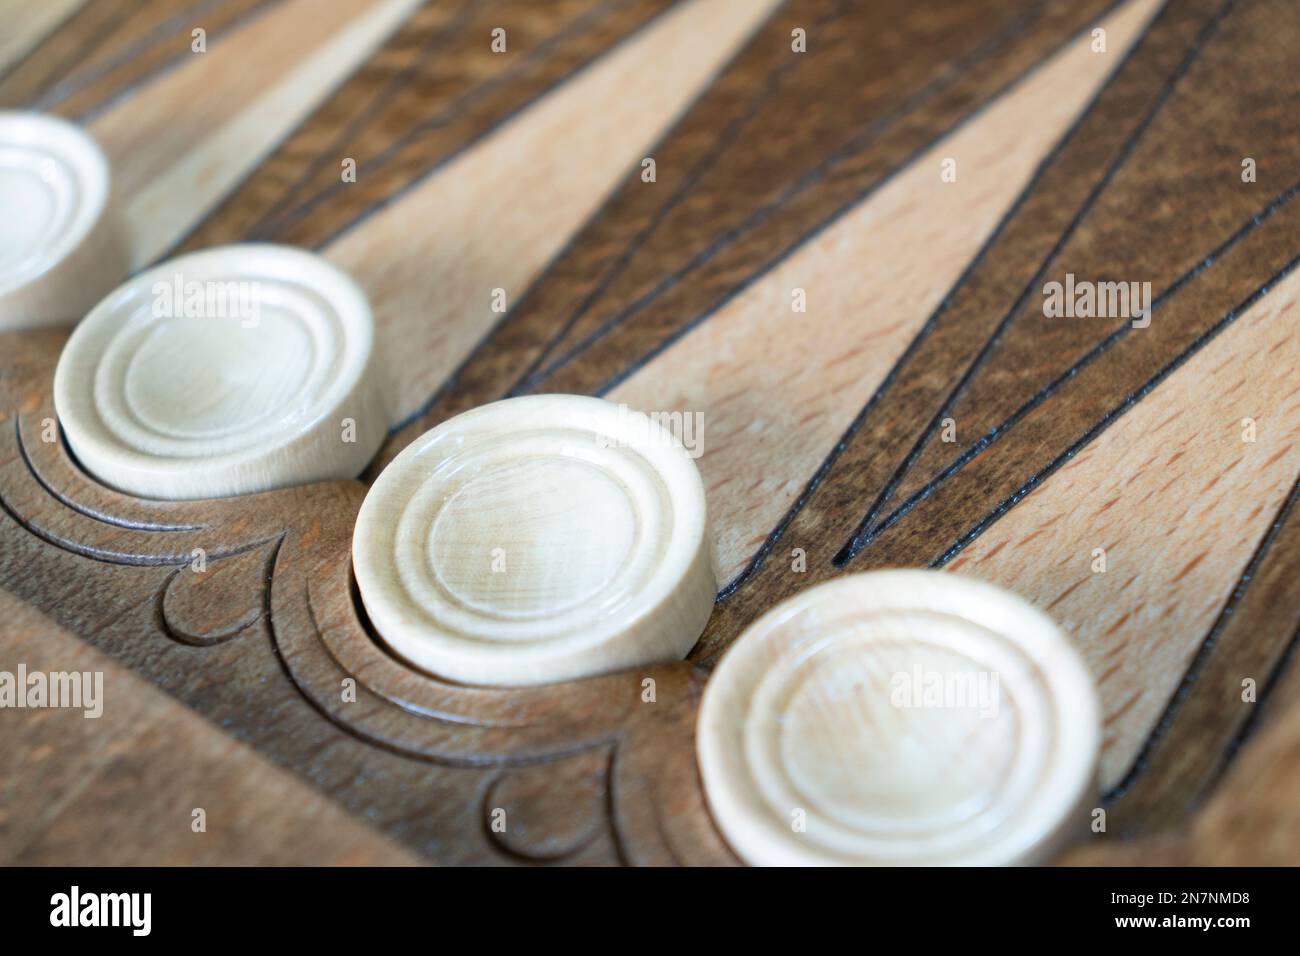 Closeup of backgammon board game. Wooden backgammon board with checkers and dice pair Stock Photo